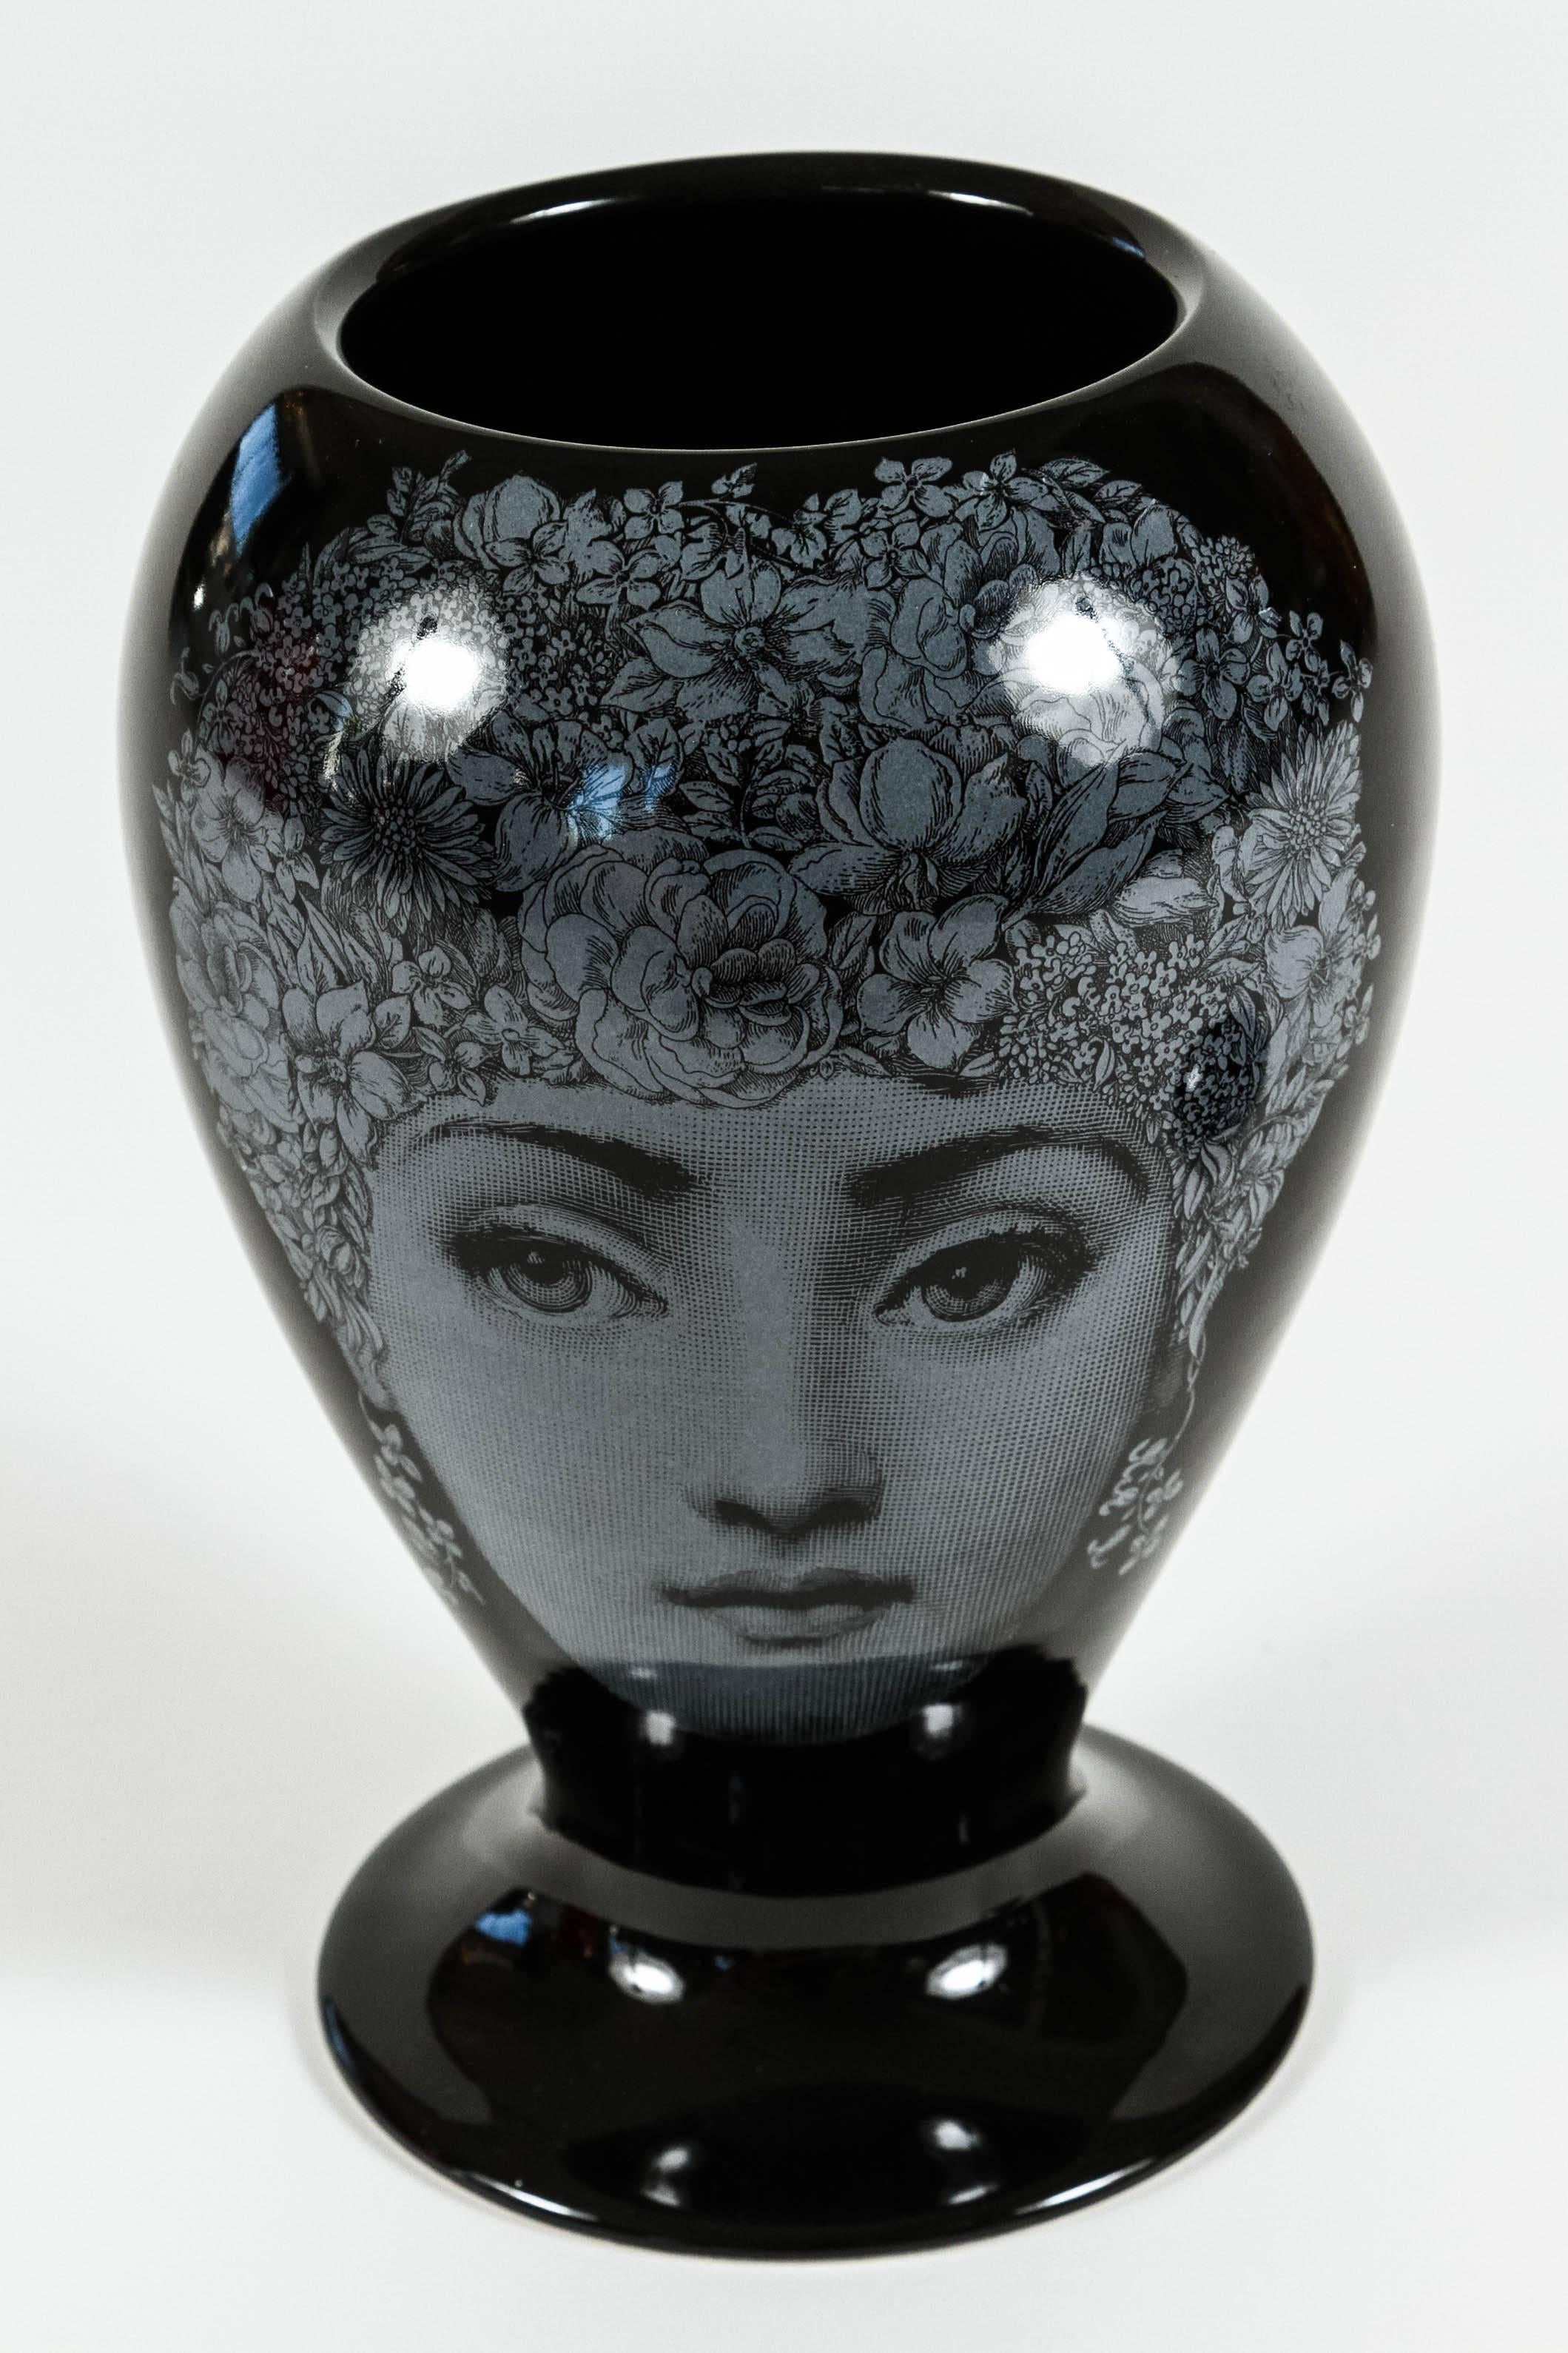 Issued by Barnaba Fornasetti, Piero's son this black glazed limited edition vase with white double decors featuring 